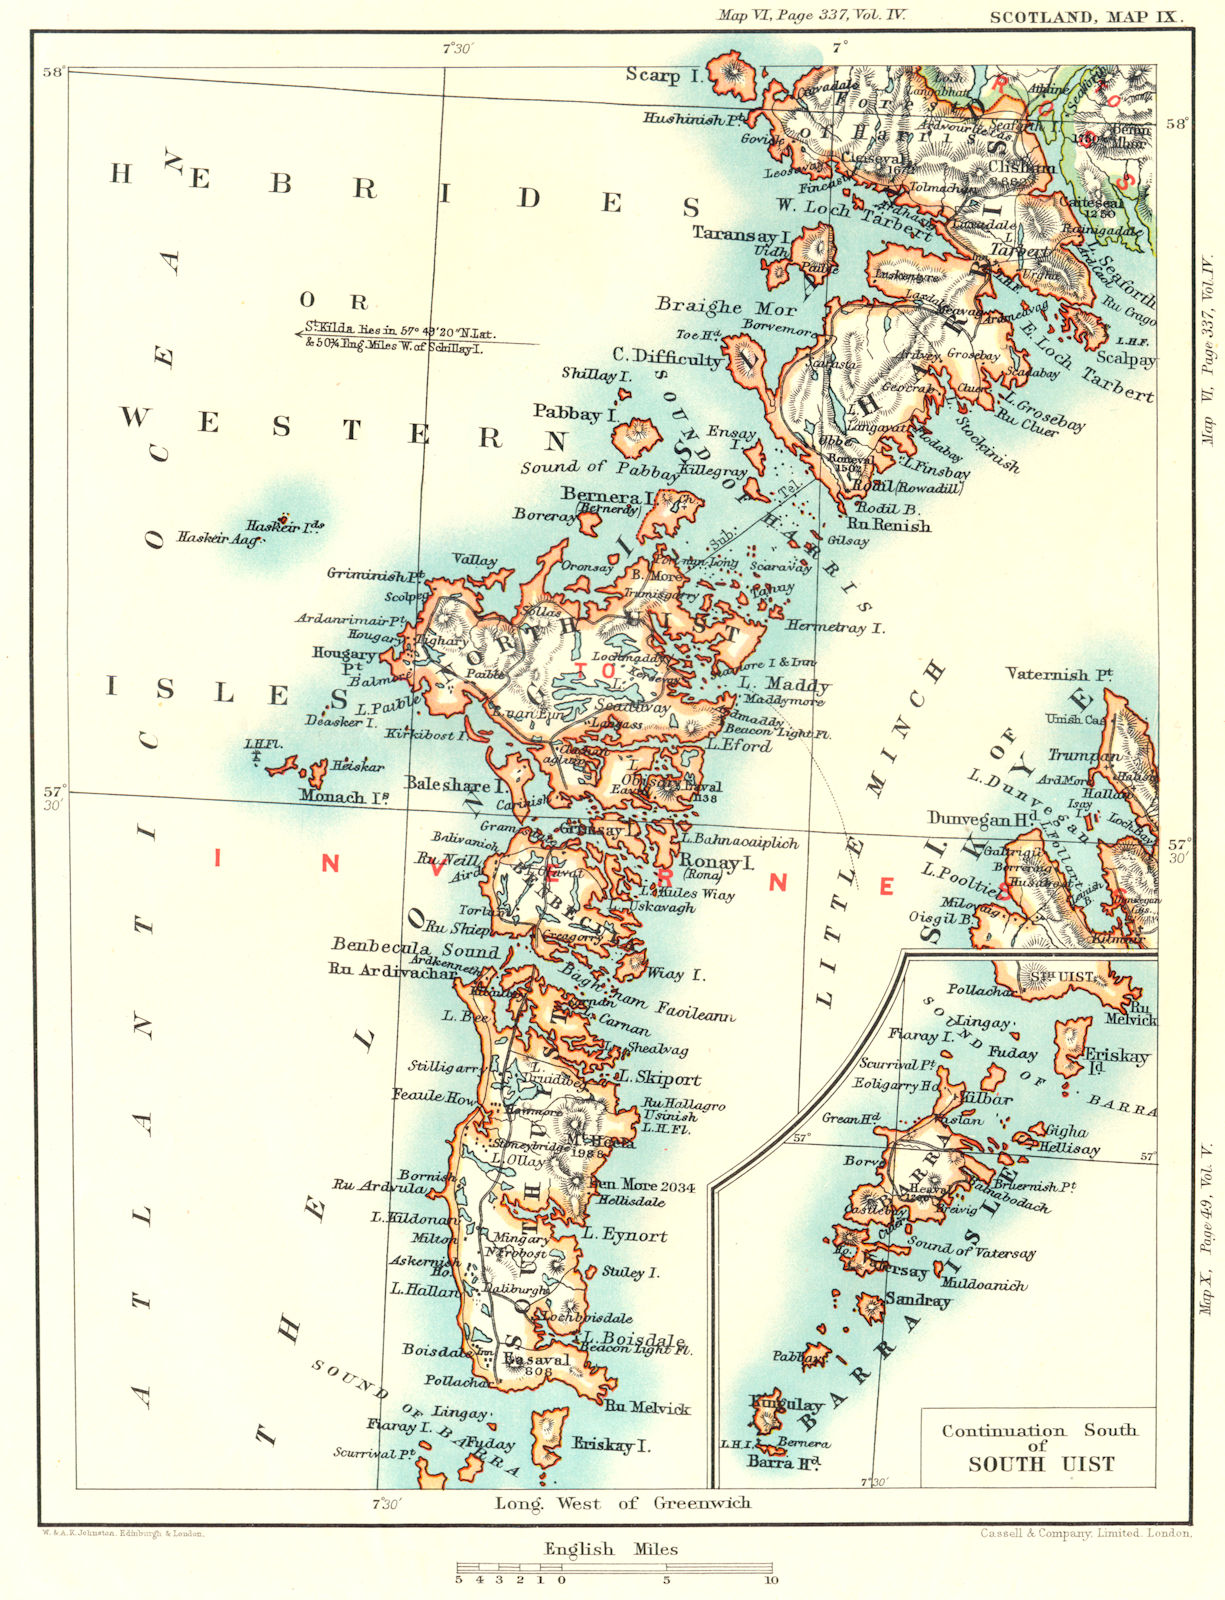 OUTER HEBRIDES / WESTERN ISLES. North & South Uist.Barra, Harris & Skye 1893 map